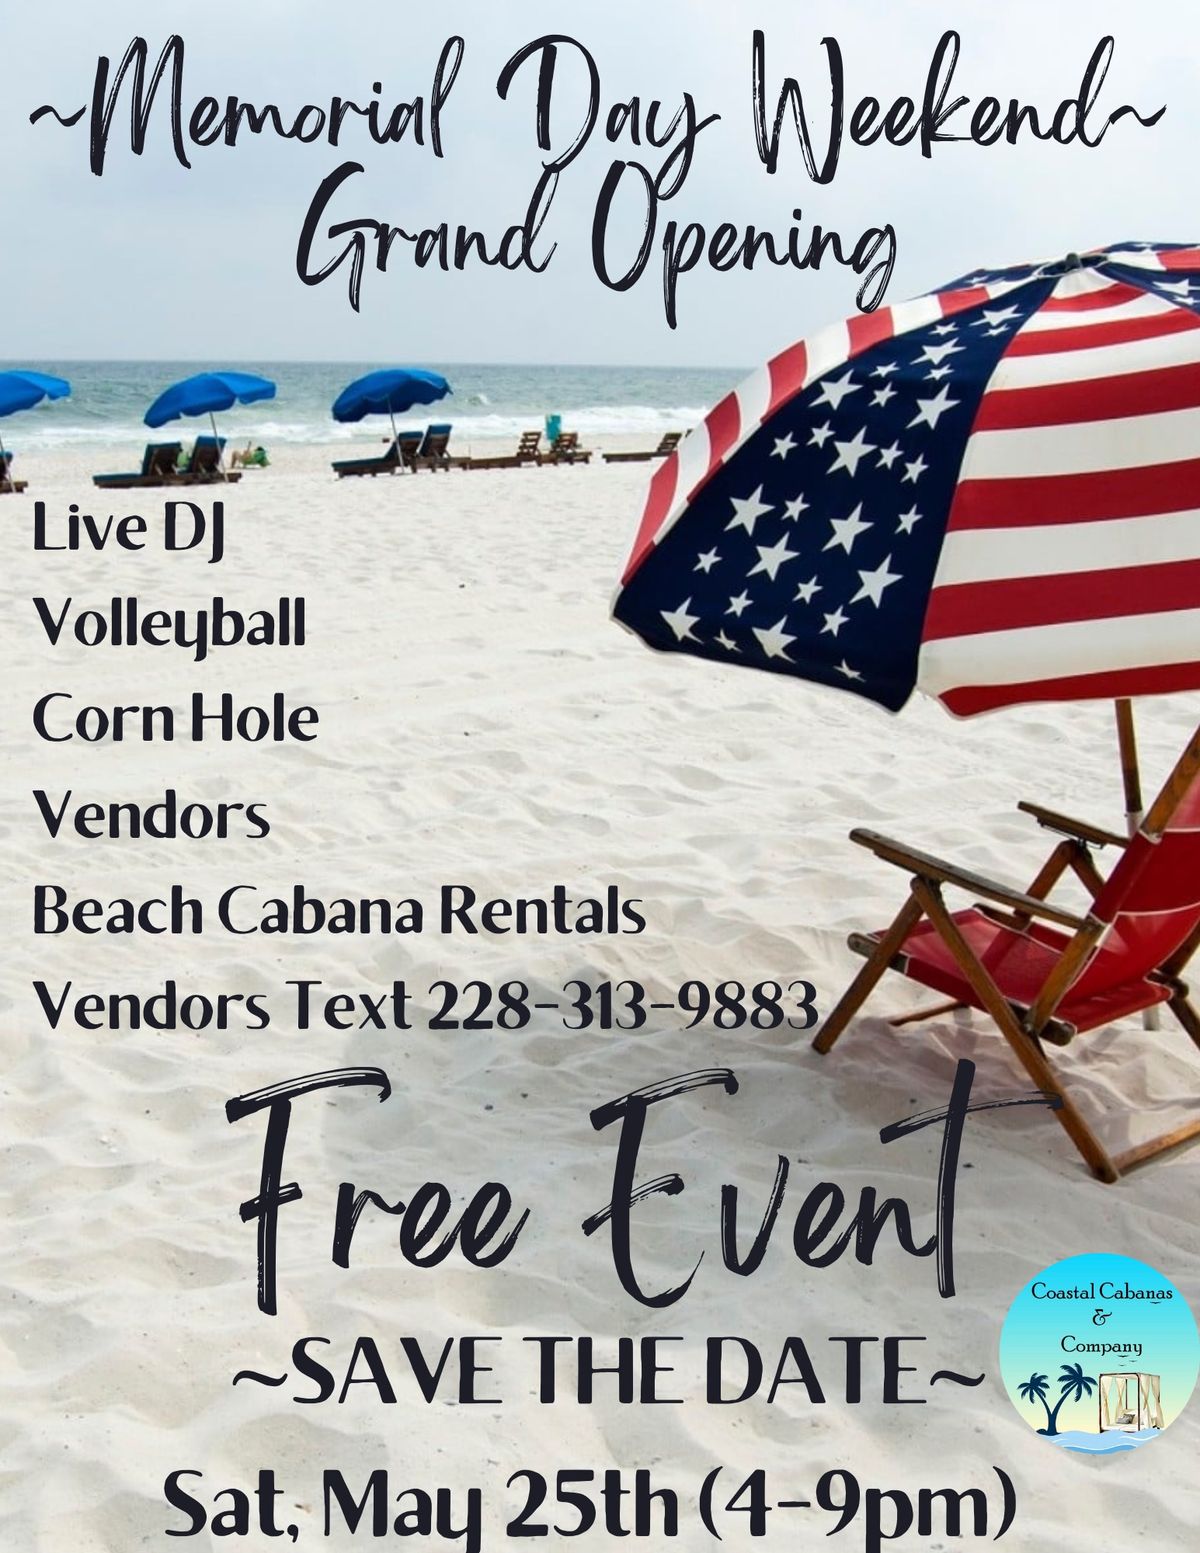 GRAND OPENING BEACH PARTY